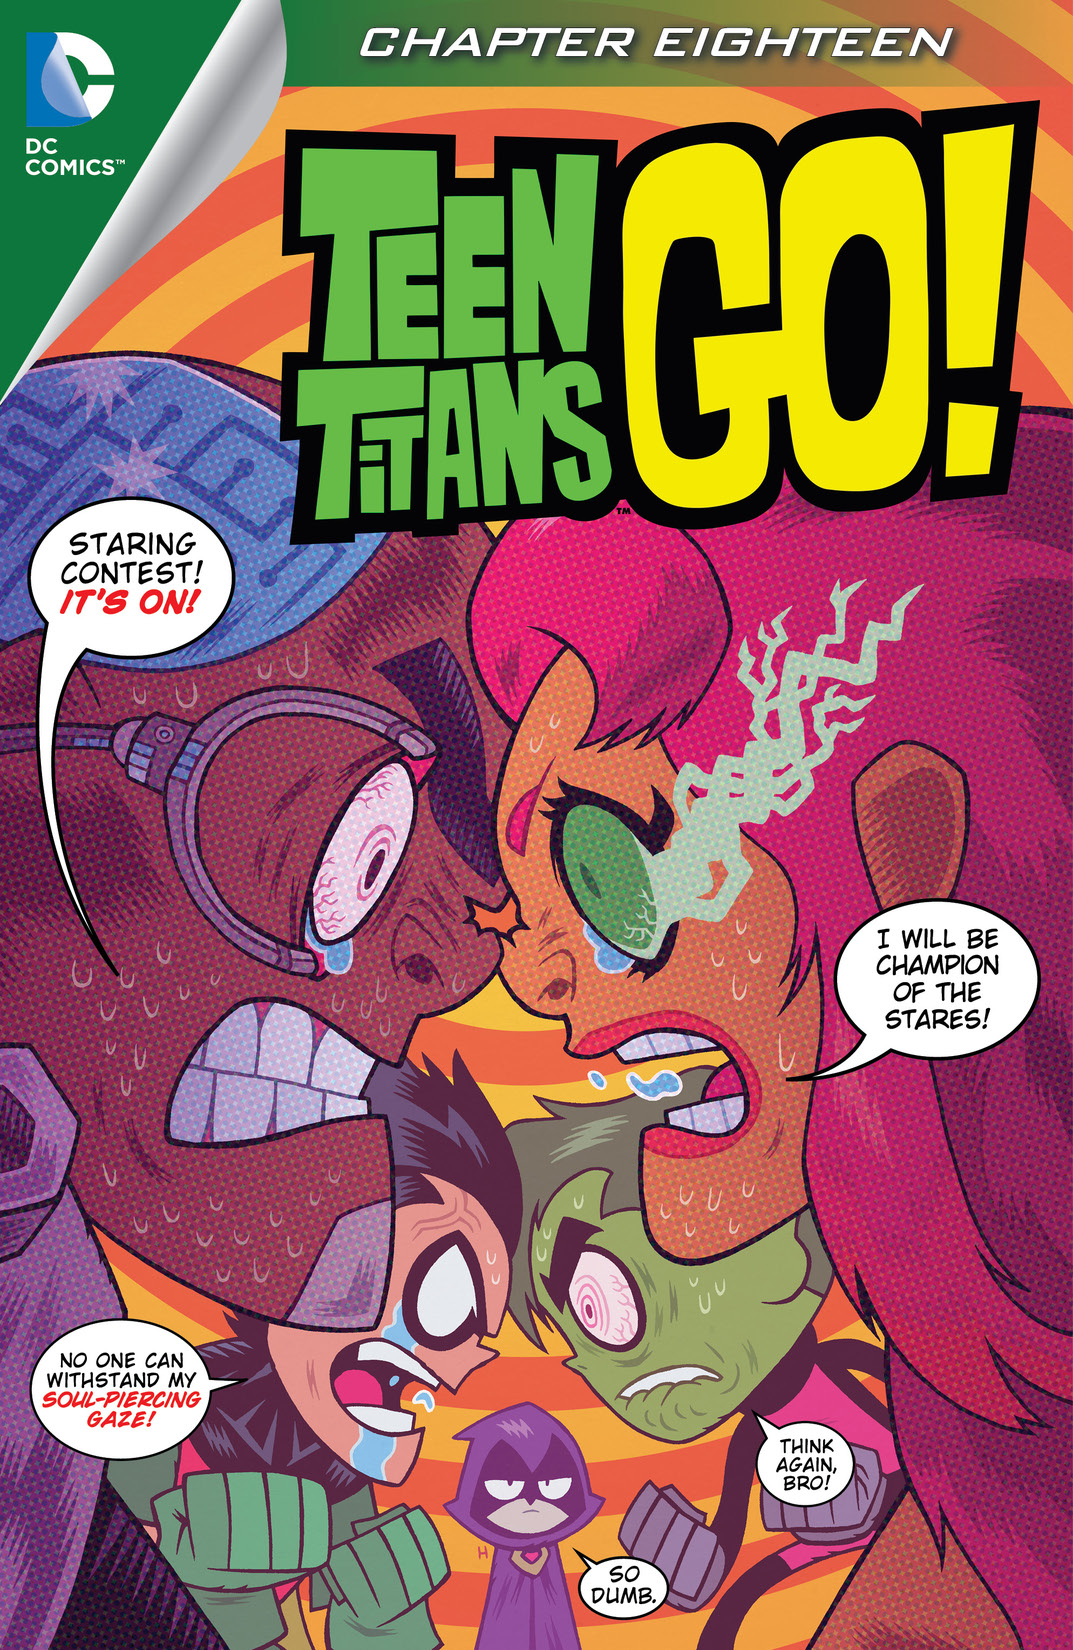 Teen Titans Go! (2013-) #18 preview images